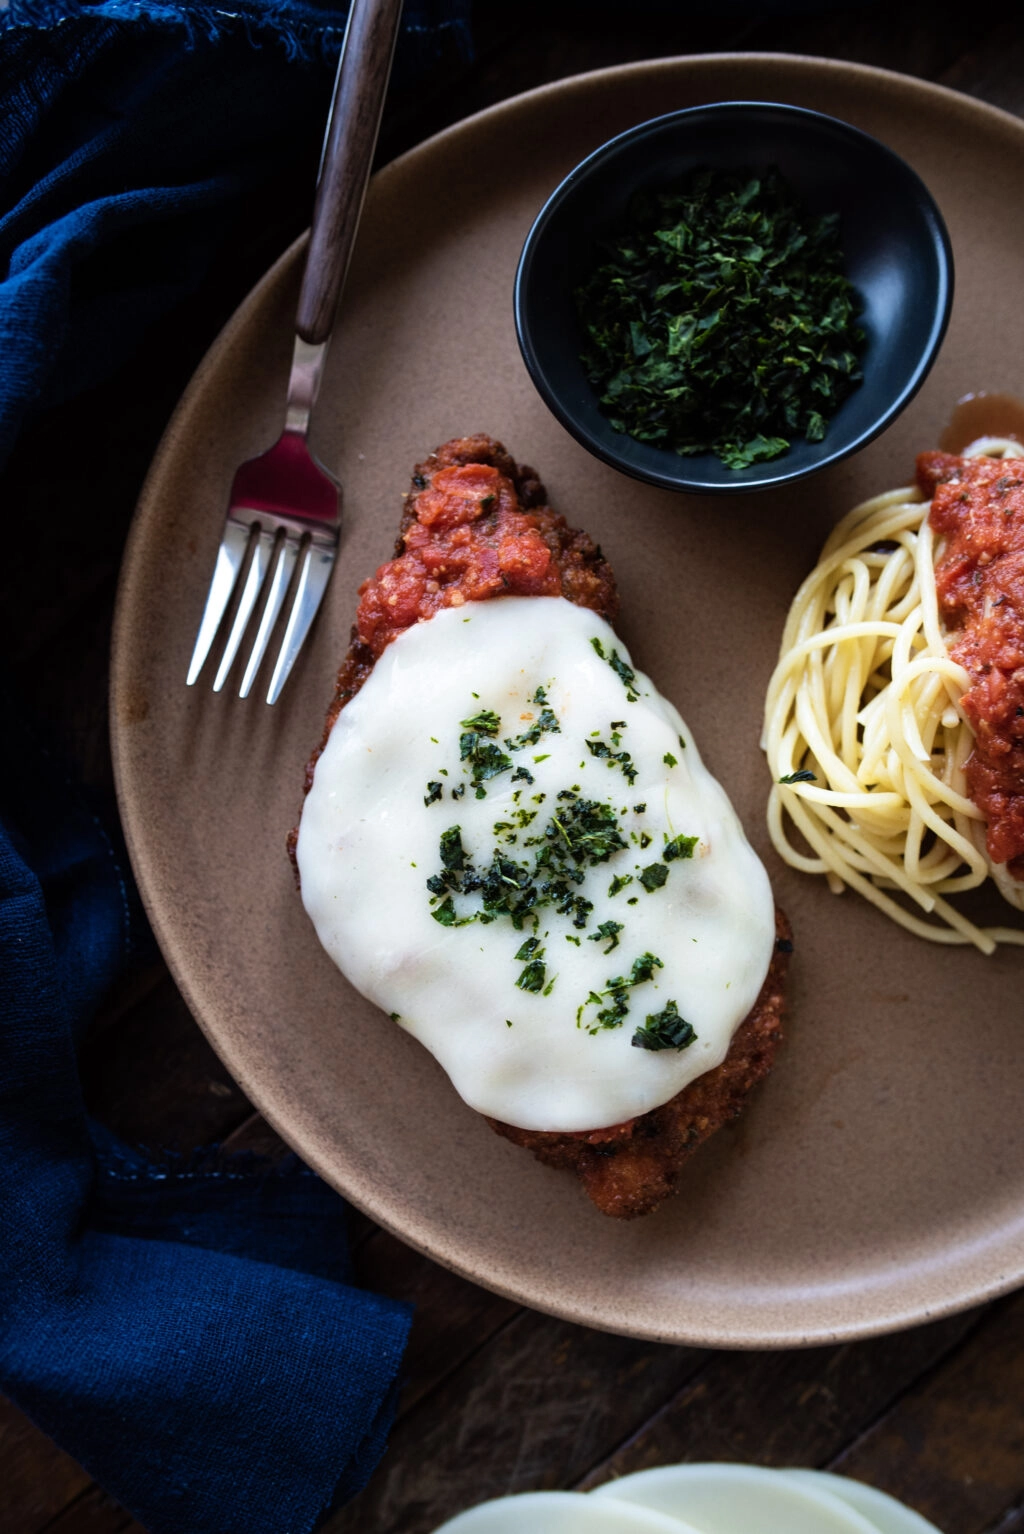 Plated chicken parmesan with a side of spaghetti and tomato sauce